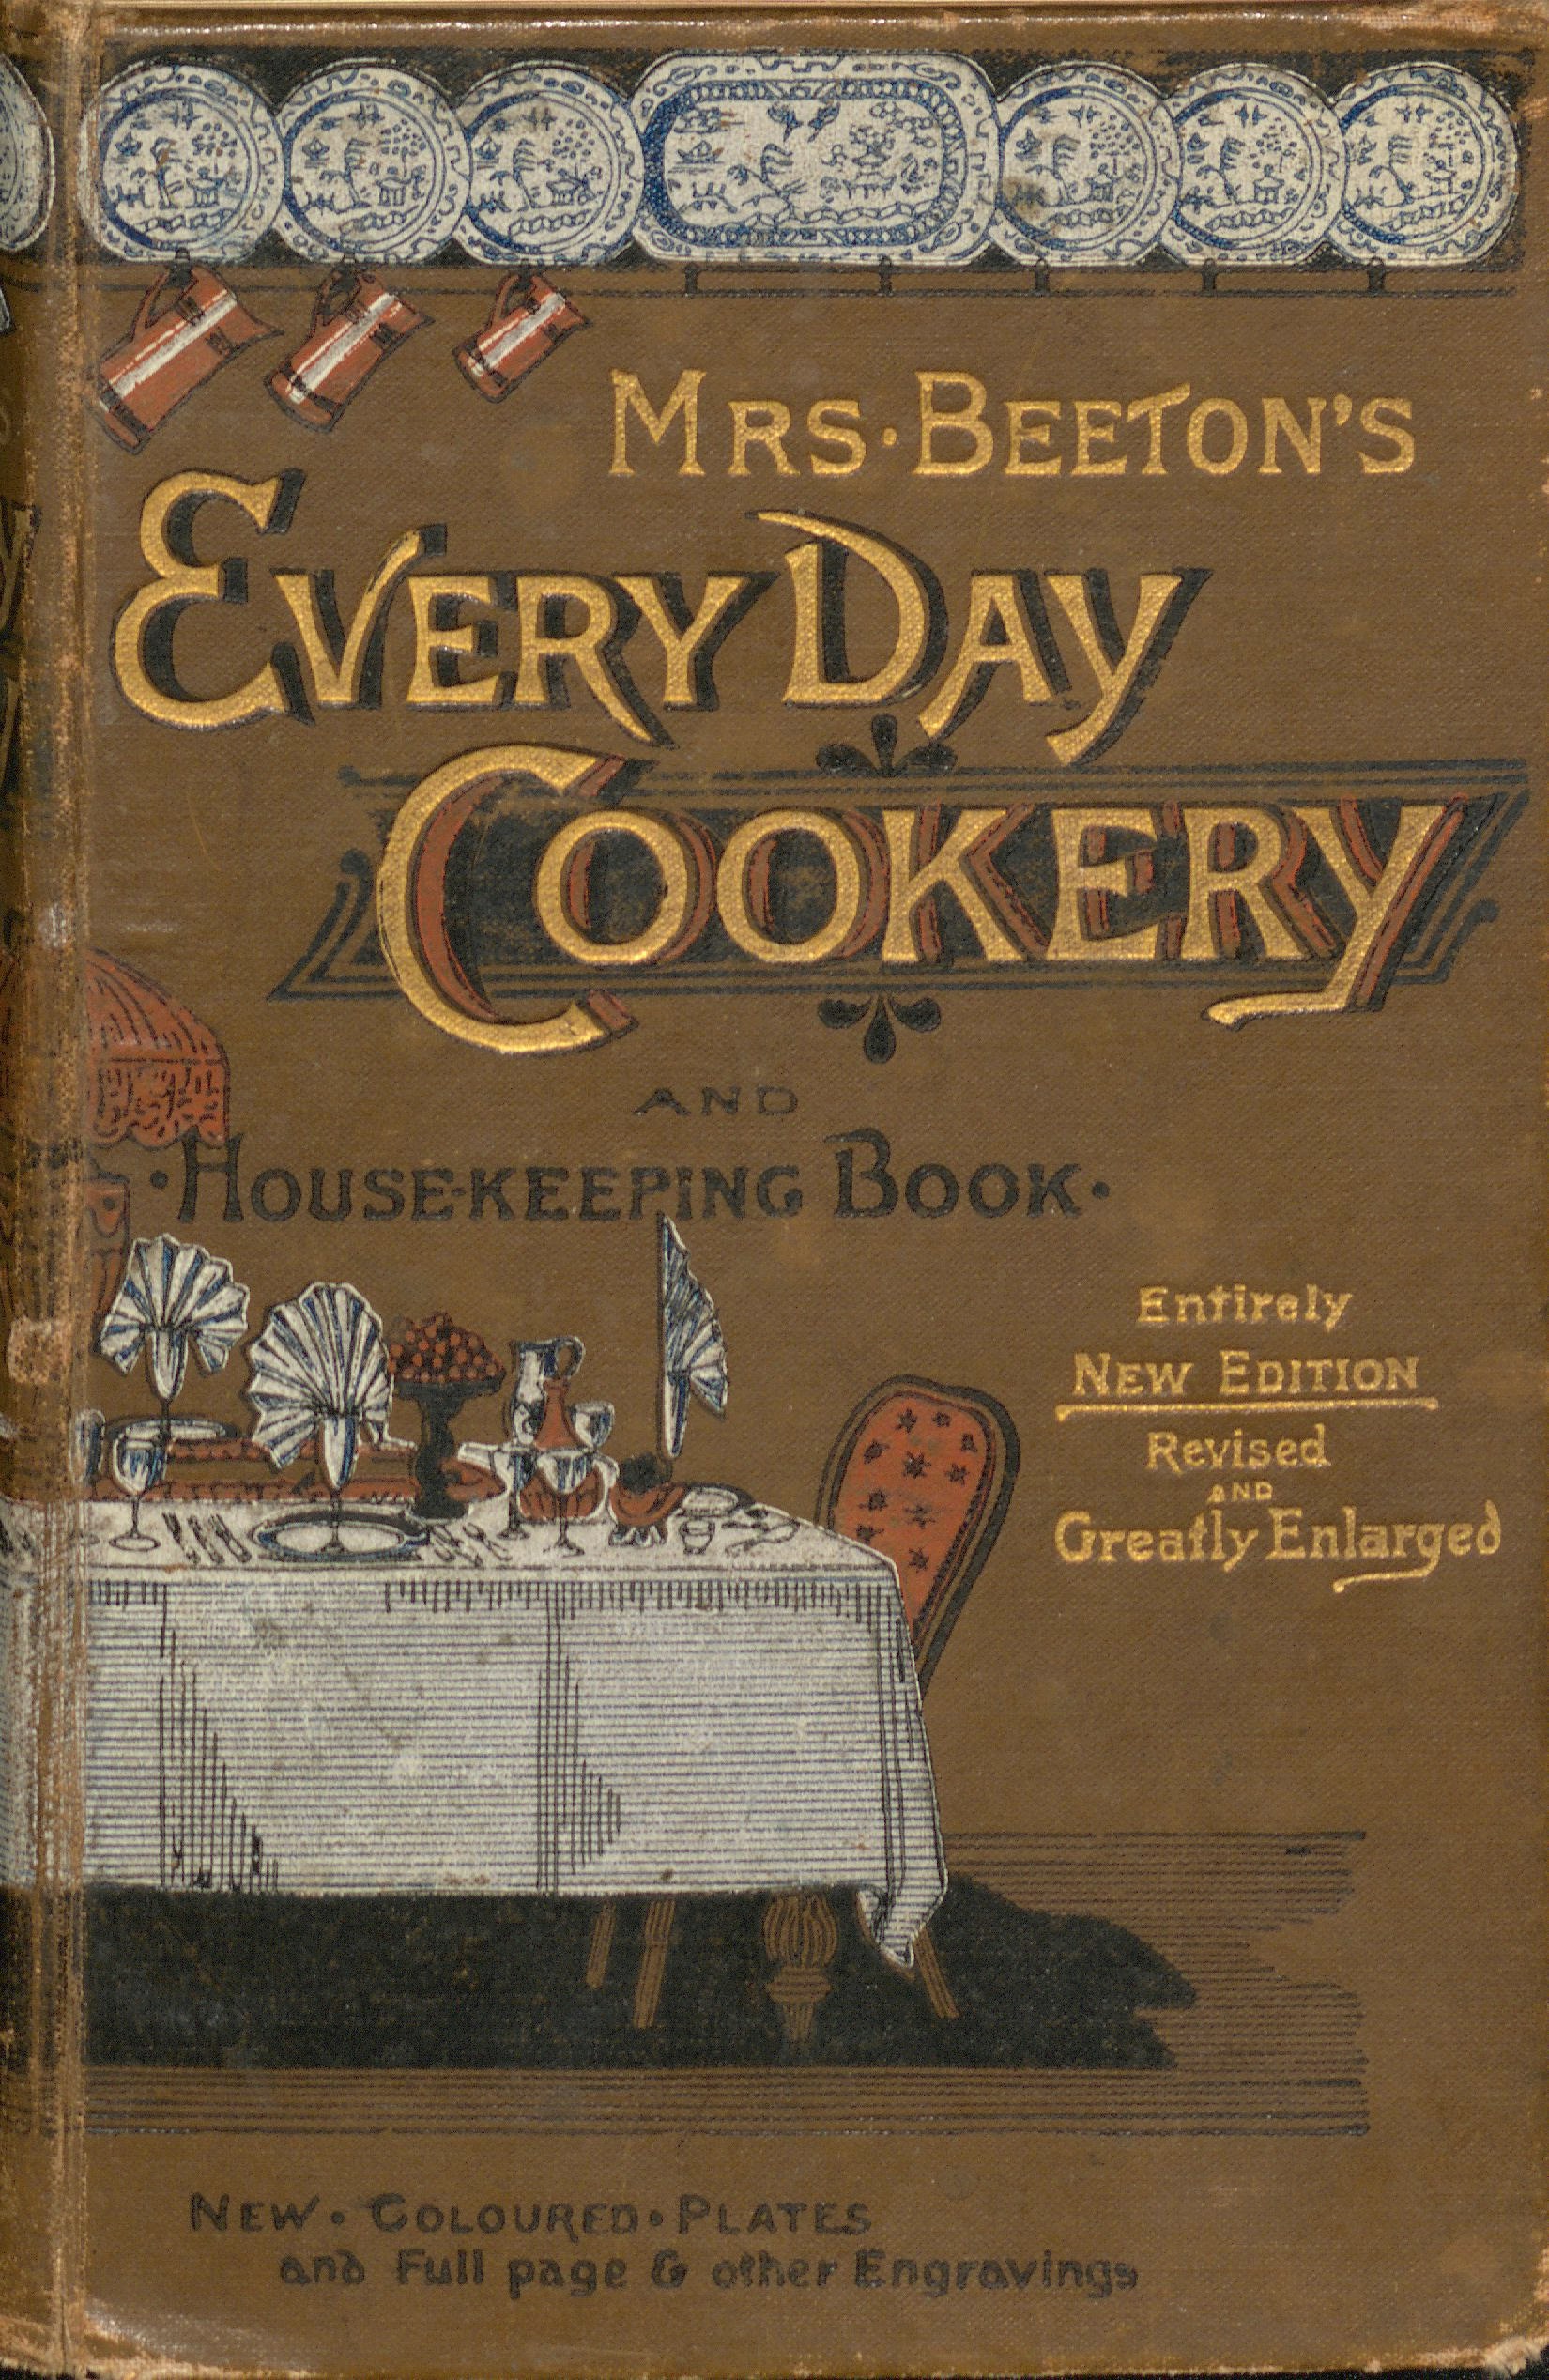 Beeton's every-day cookery and housekeeping book: a practical and useful guide for all mistresses and servants by Mrs. Isabella Mary Beeton, 1836-1865 (London: Ward, Lock). 